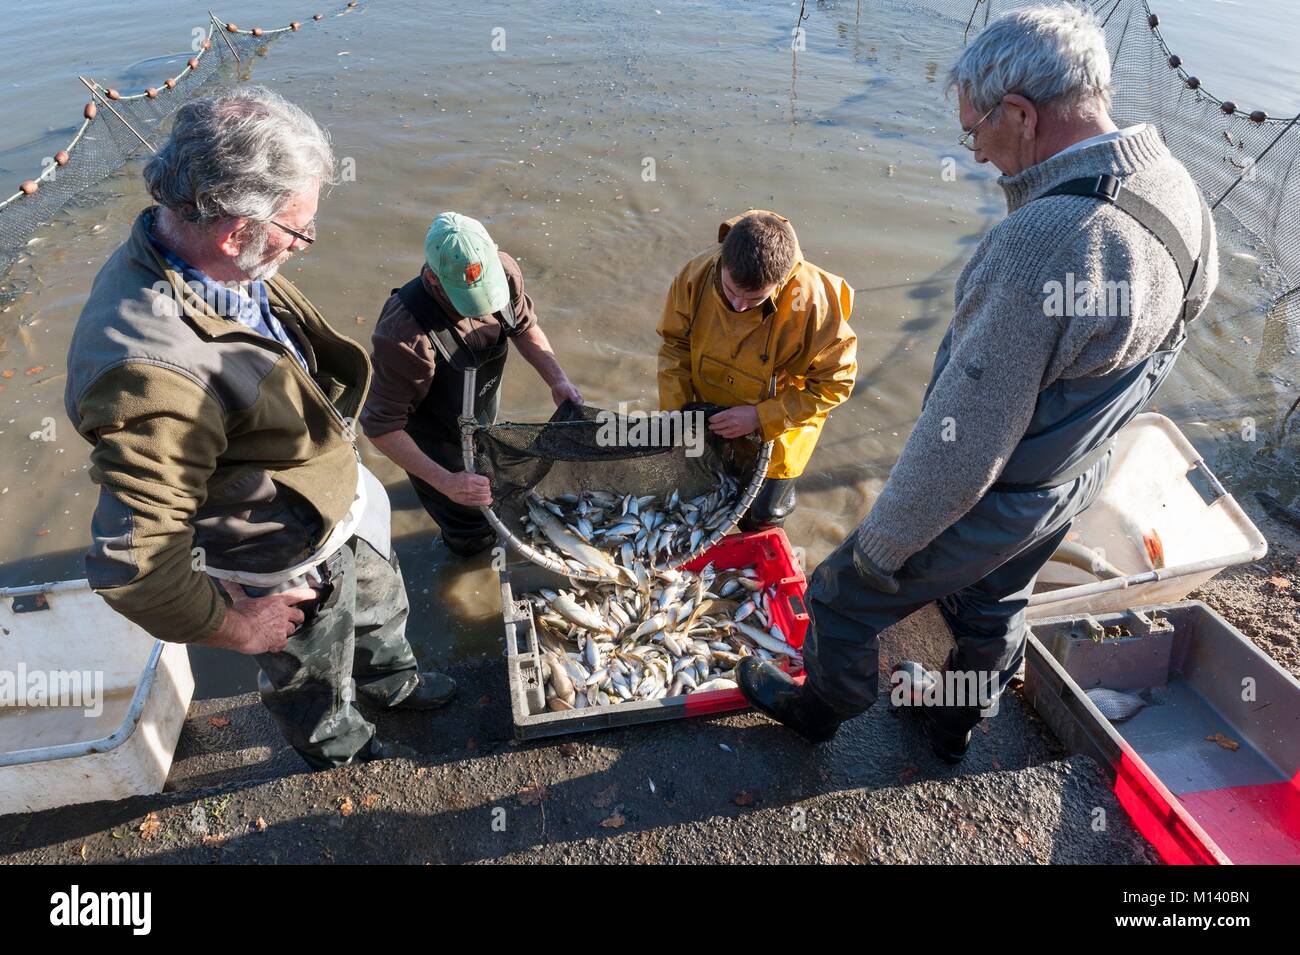 France, Indre, Saint Michel en Brenne, Brenne Regional Natural Park, dredging and fishing at the Gorgeat pond at a place called Village de Loup, Gerard Noury fish farmer Stock Photo